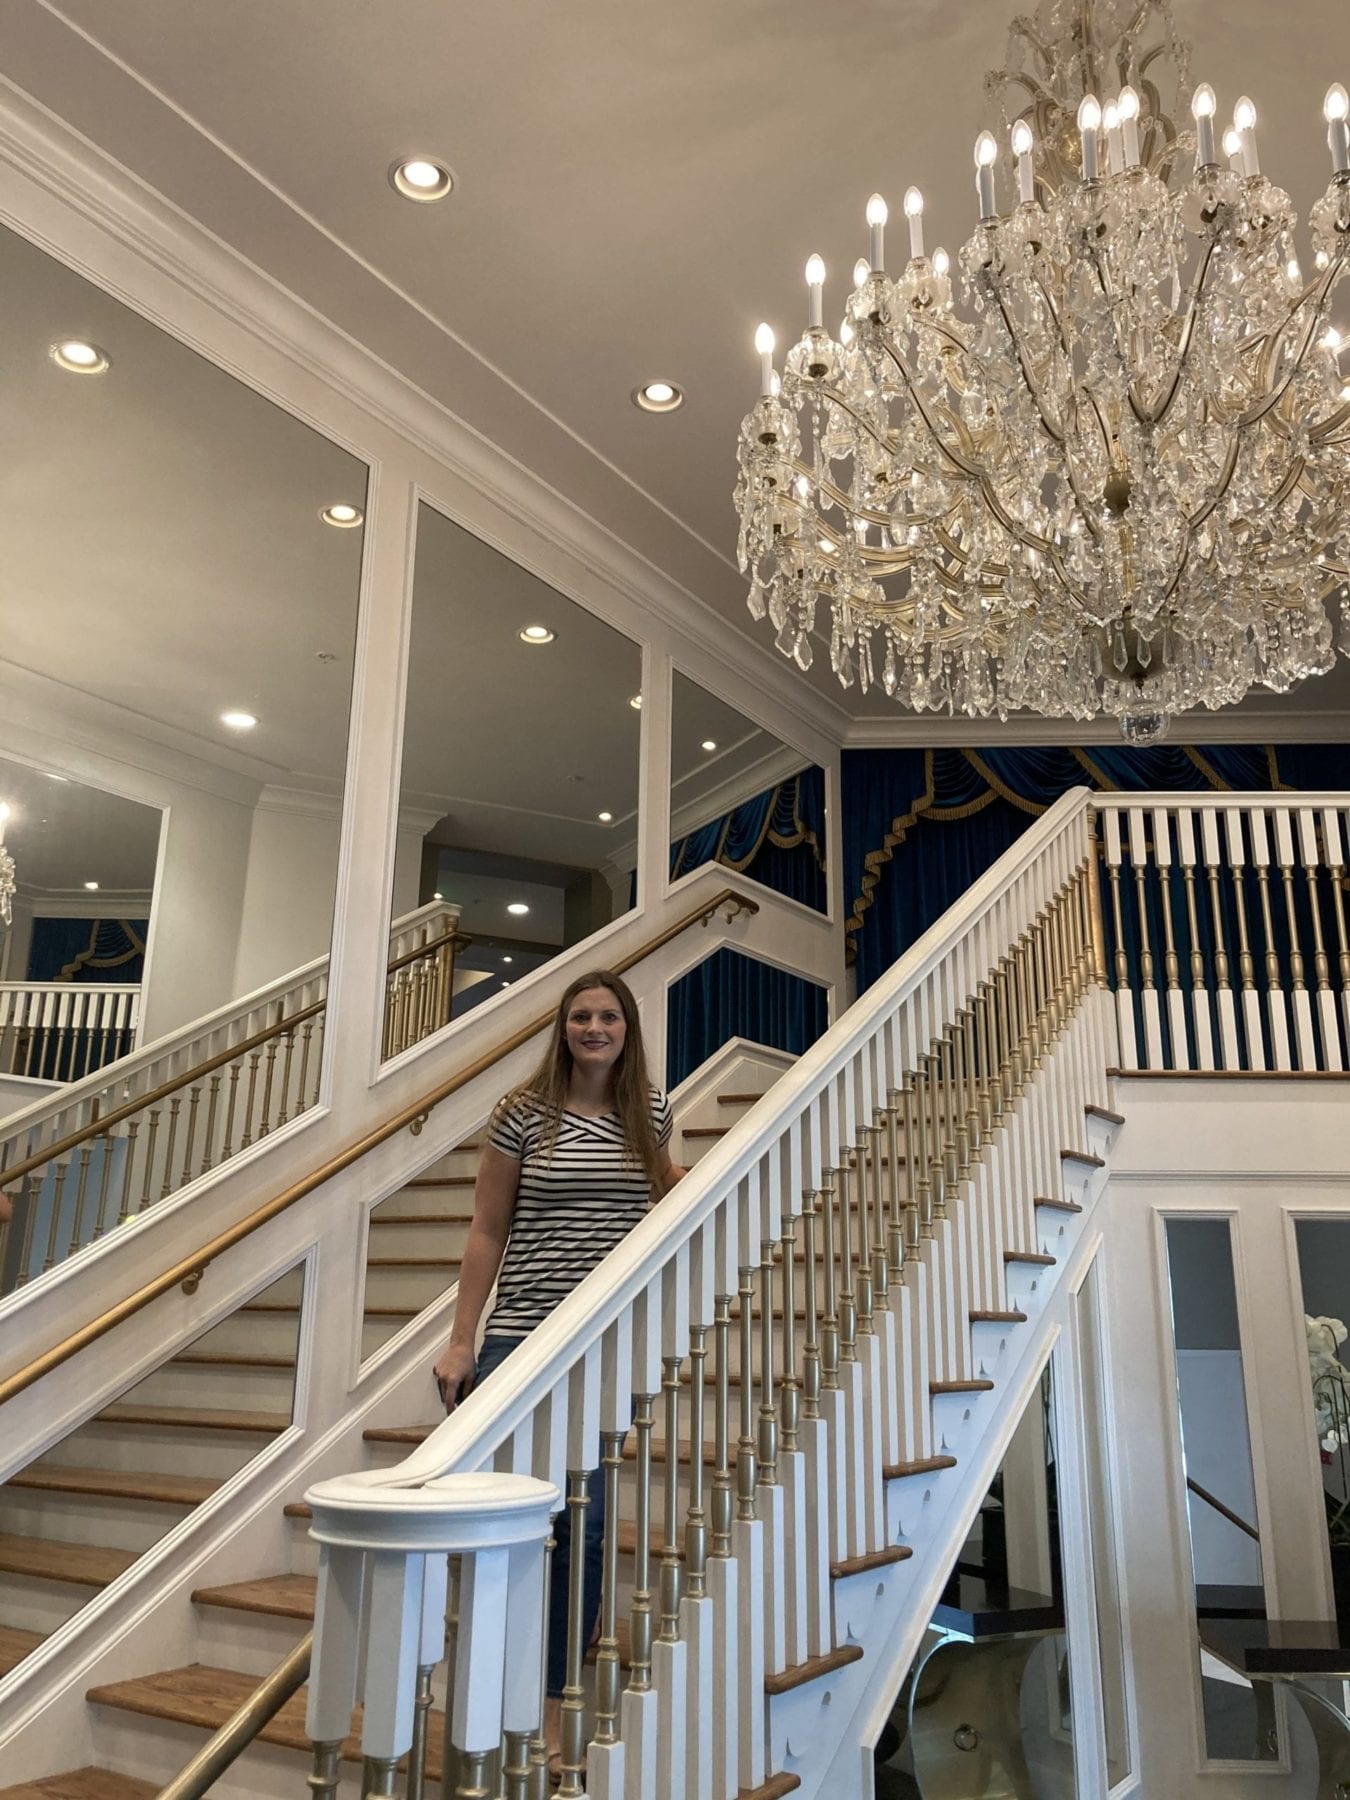 The Staircase at Guest House at Graceland